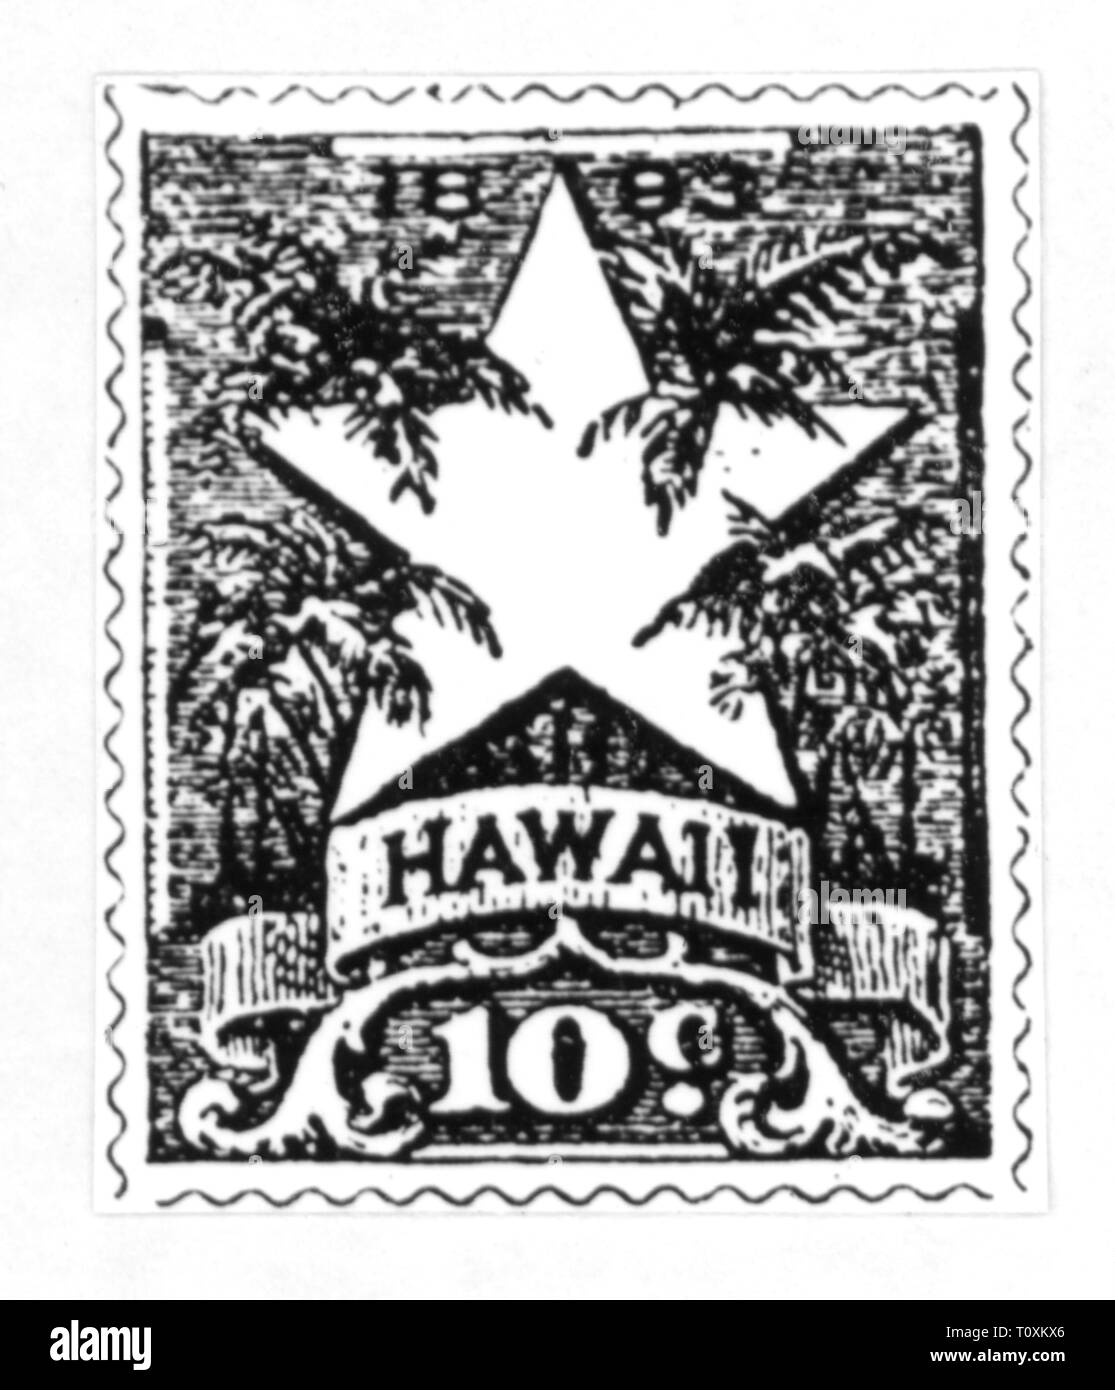 mail, postage stamps, USA, Republic of Hawaii, date of issue: 28.2.1894,  star, stars, year date 1893, , 19th century, mail, post, postage stamps,  postage stamp, USA, United States of America, republic, republics